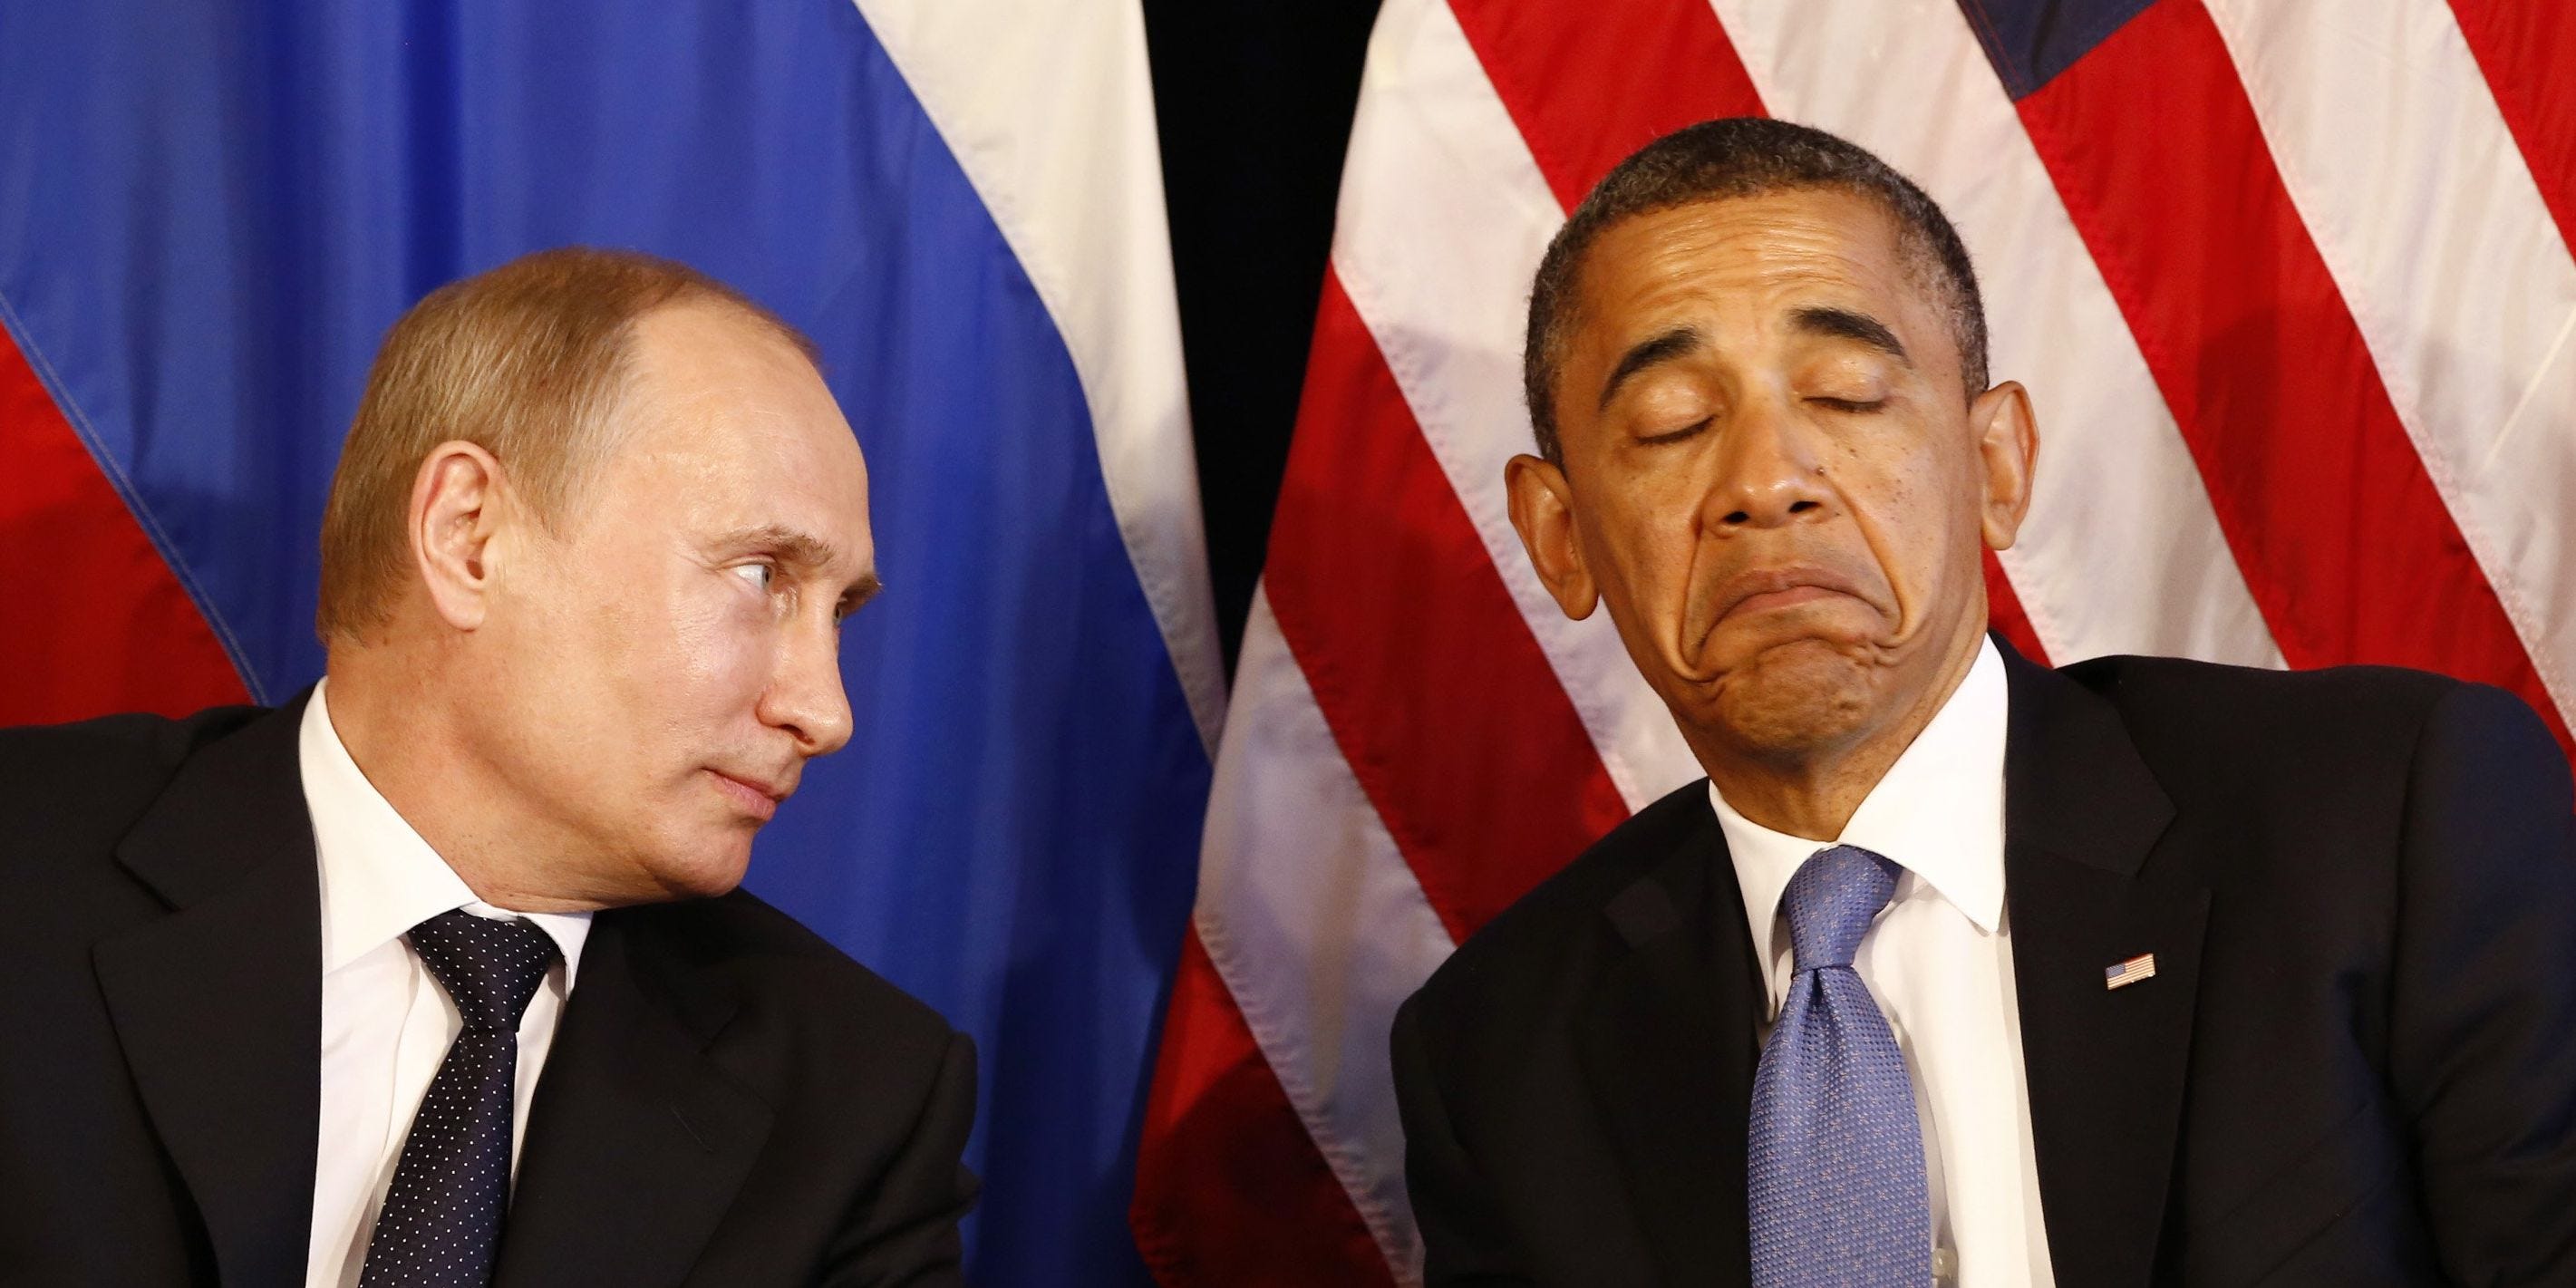 body-language-expert-putin-appeared-agitated-during-meeting-with-obama.jpg